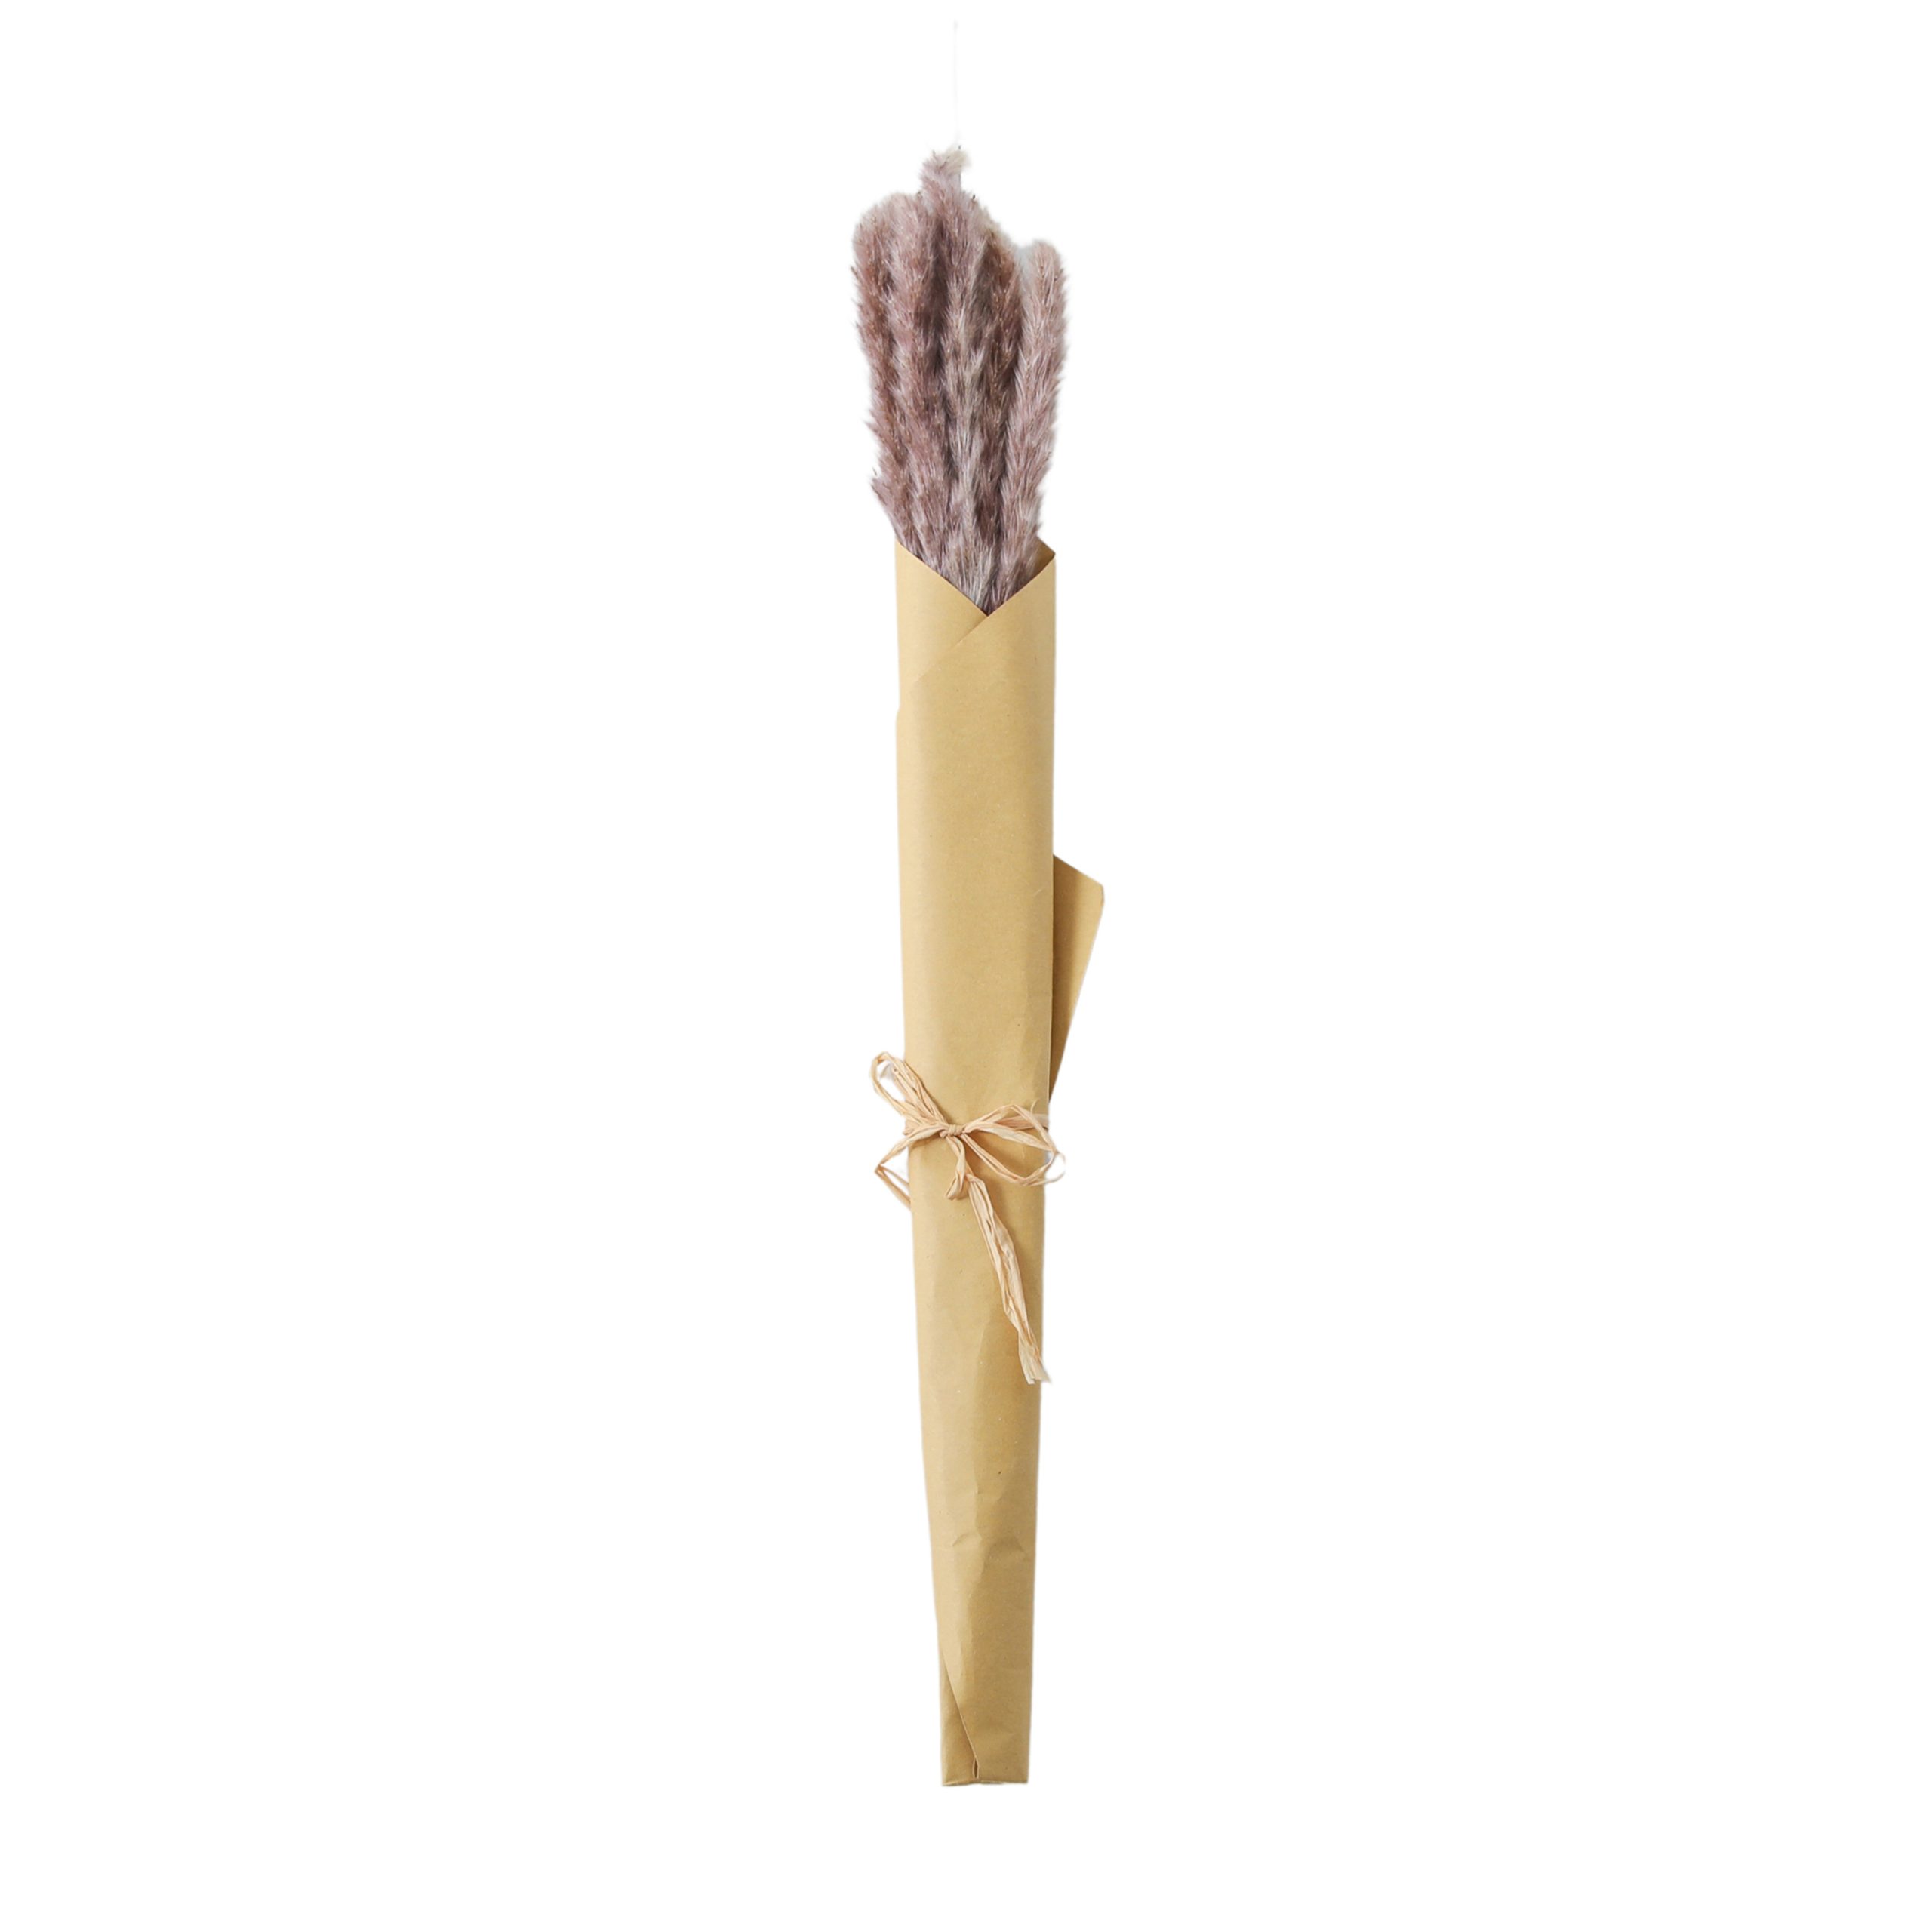 Gallery Direct Dried Reed Grass Bundle in Paper Wrap Lilac